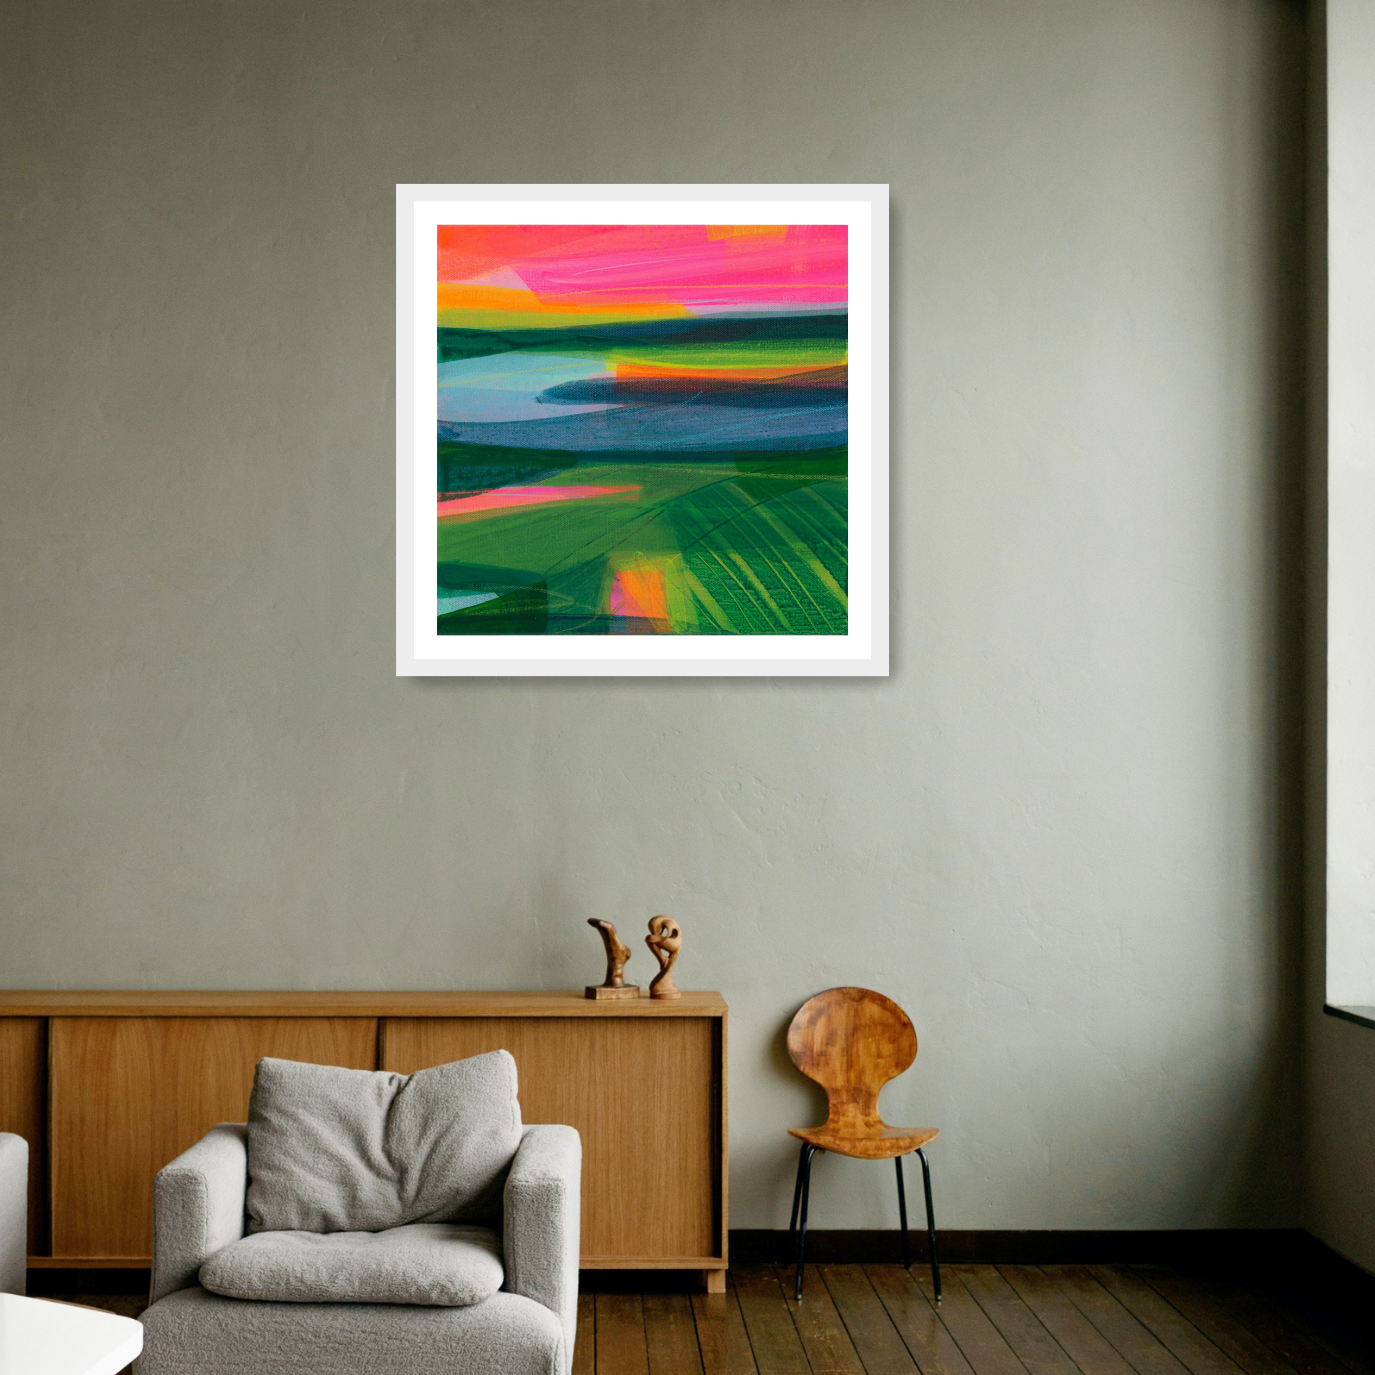 'Embraced by Sussex, 2021' by Faye Bridgwater: a white framed fine art print capturing the vibrant South Downs landscape. Experience the essence of Sussex countryside walks in this contemporary mixed media artwork.